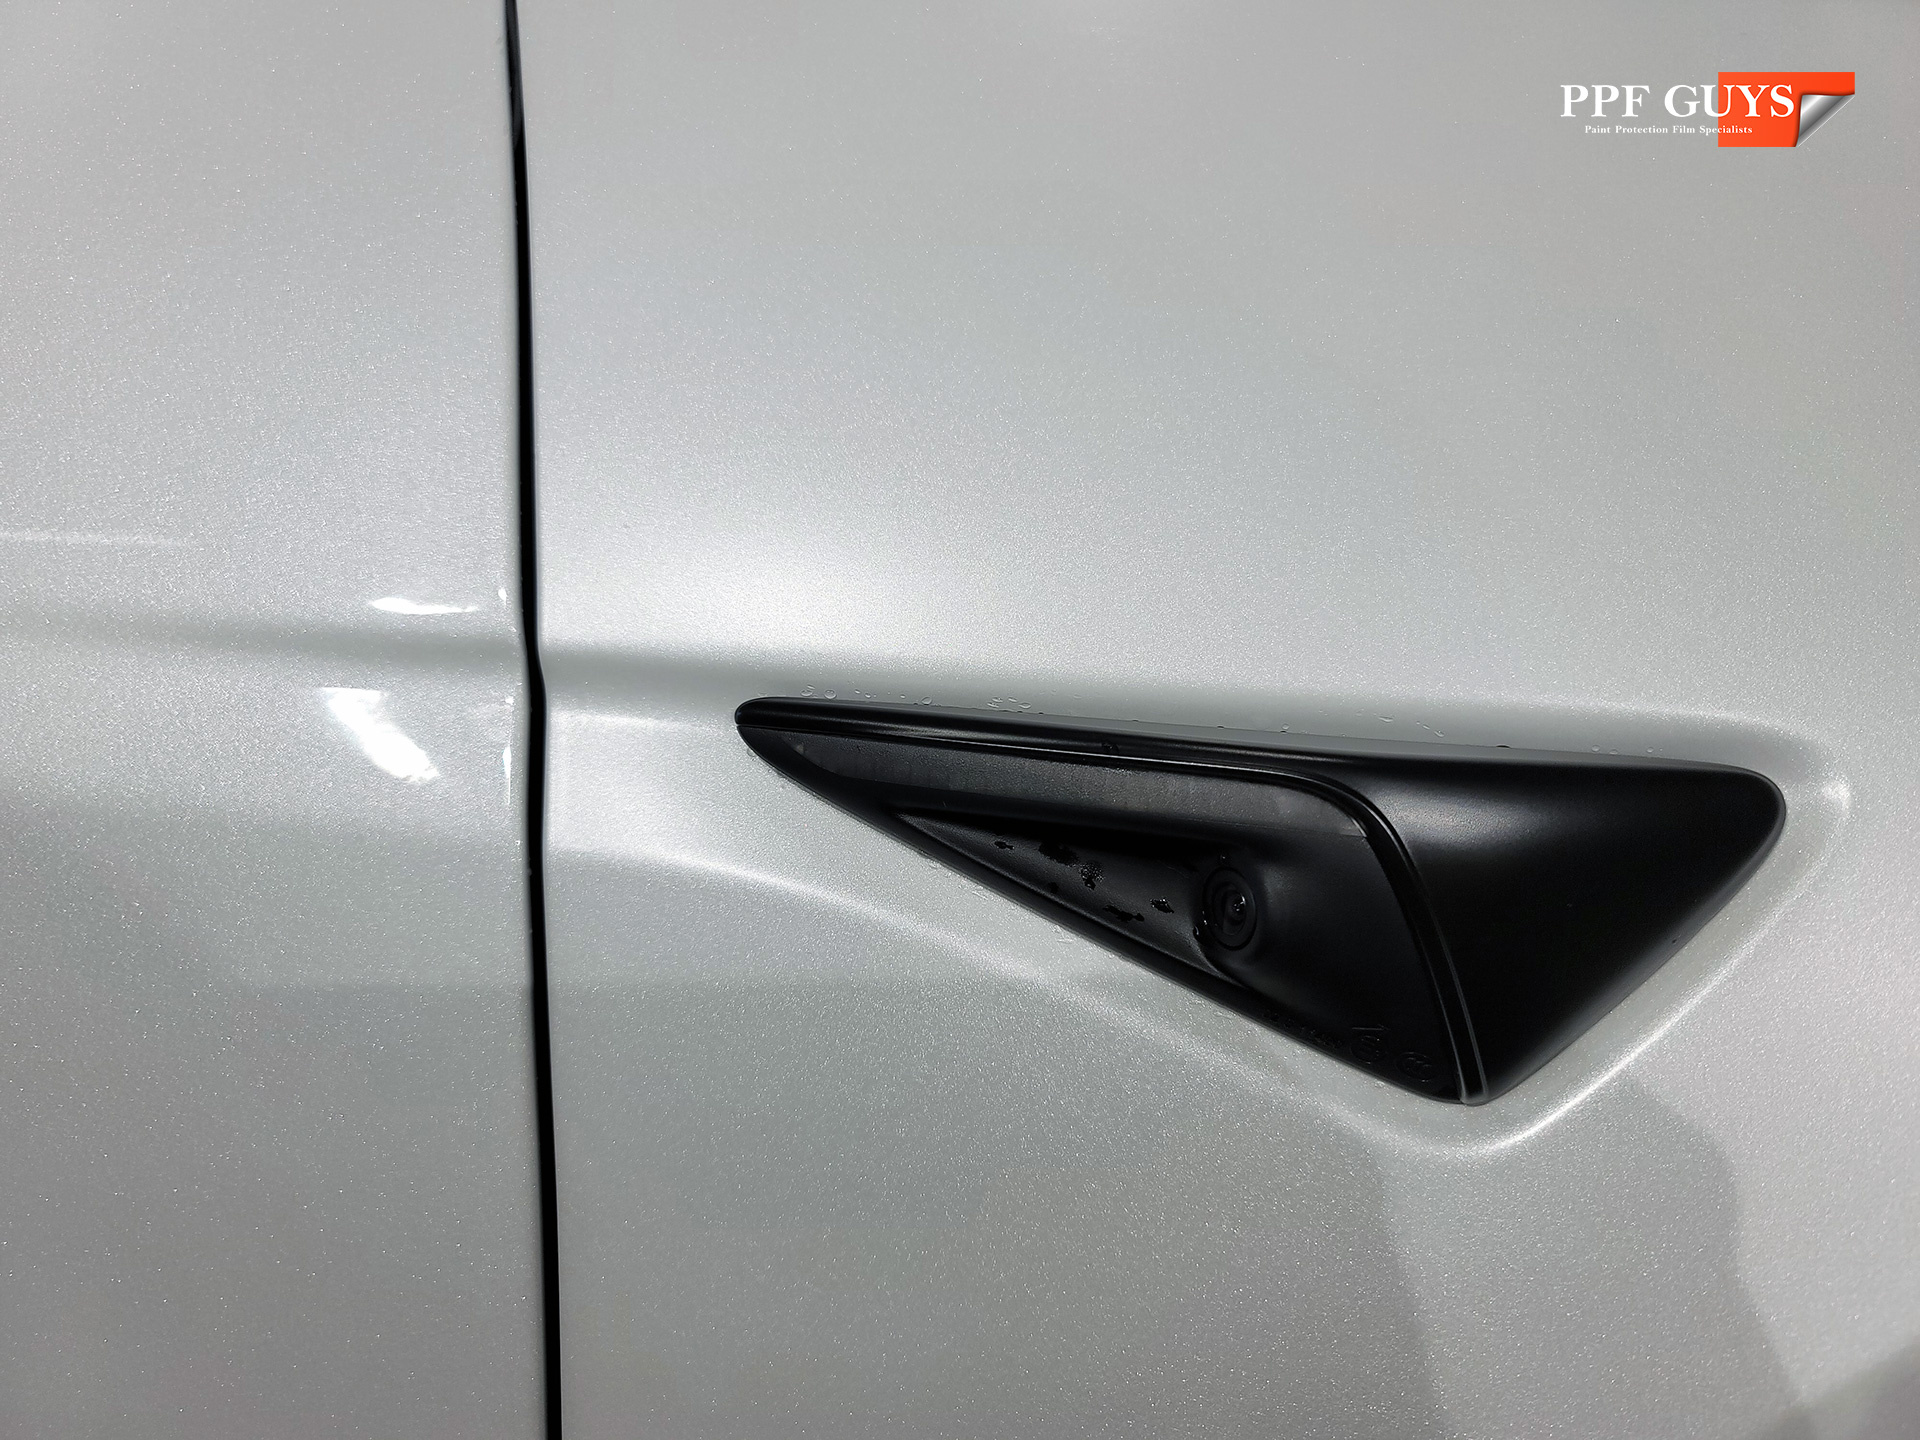 PPF Guys Model Y White Xpel Stealth, ceramic, painted emblems (12).jpg